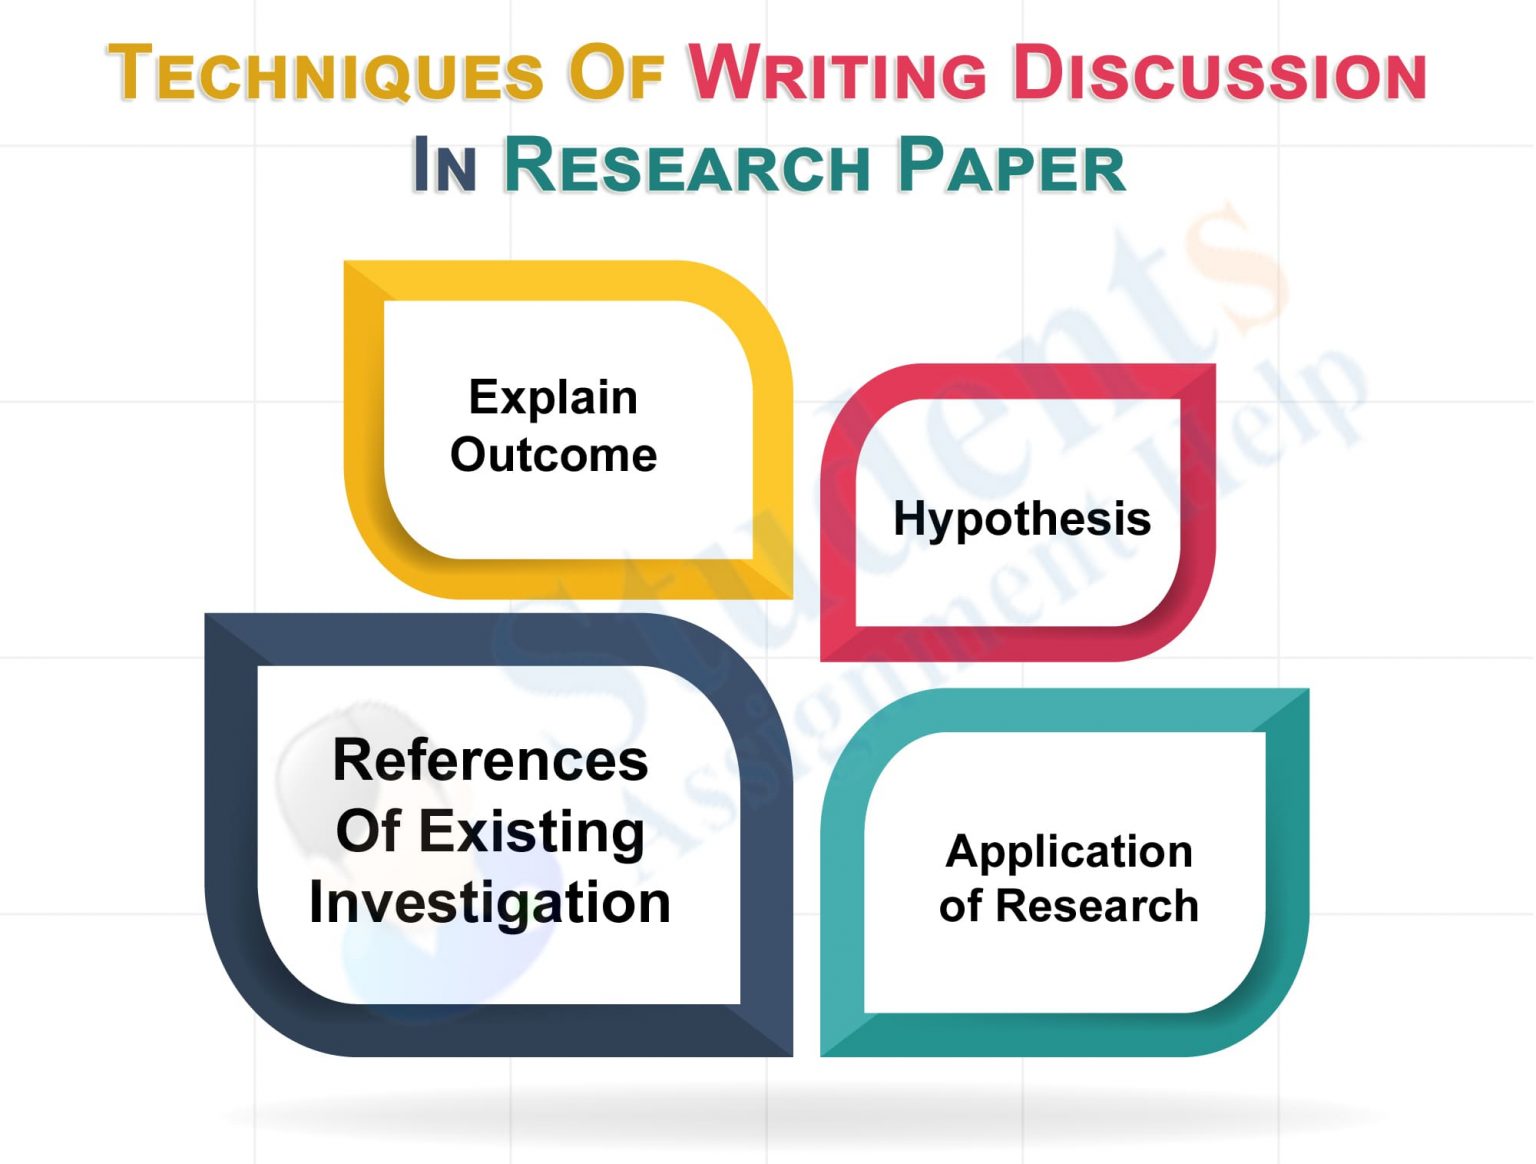 example of discussion of findings in research